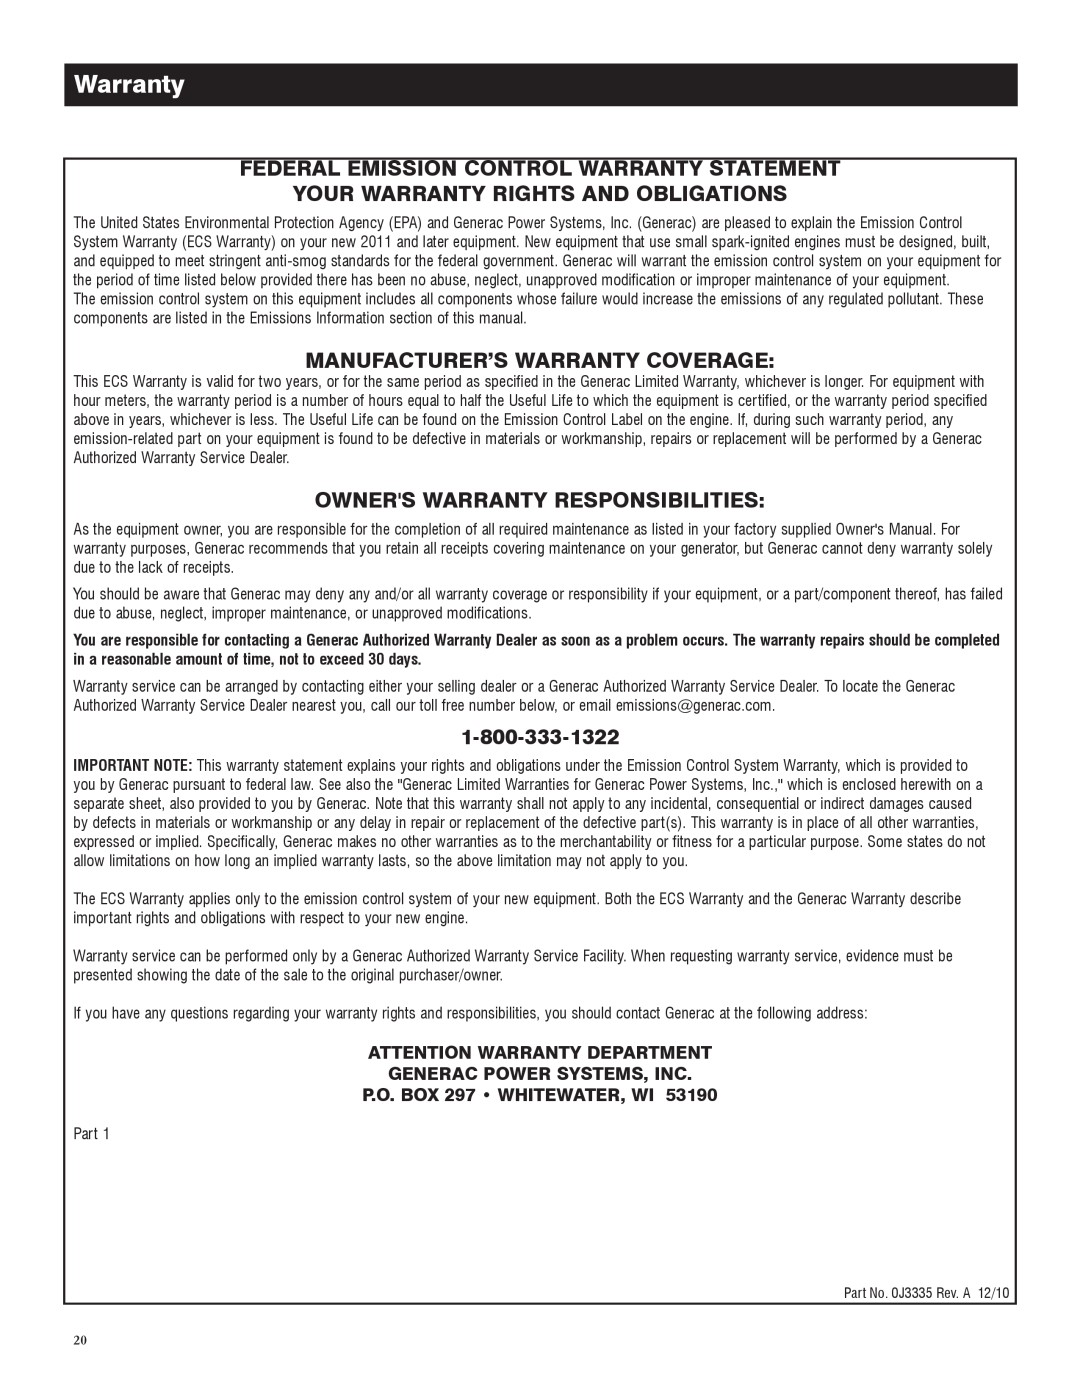 Generac 005734-0, 005735-0 Federal Emission Control Warranty Statement, Your Warranty Rights And Obligations 